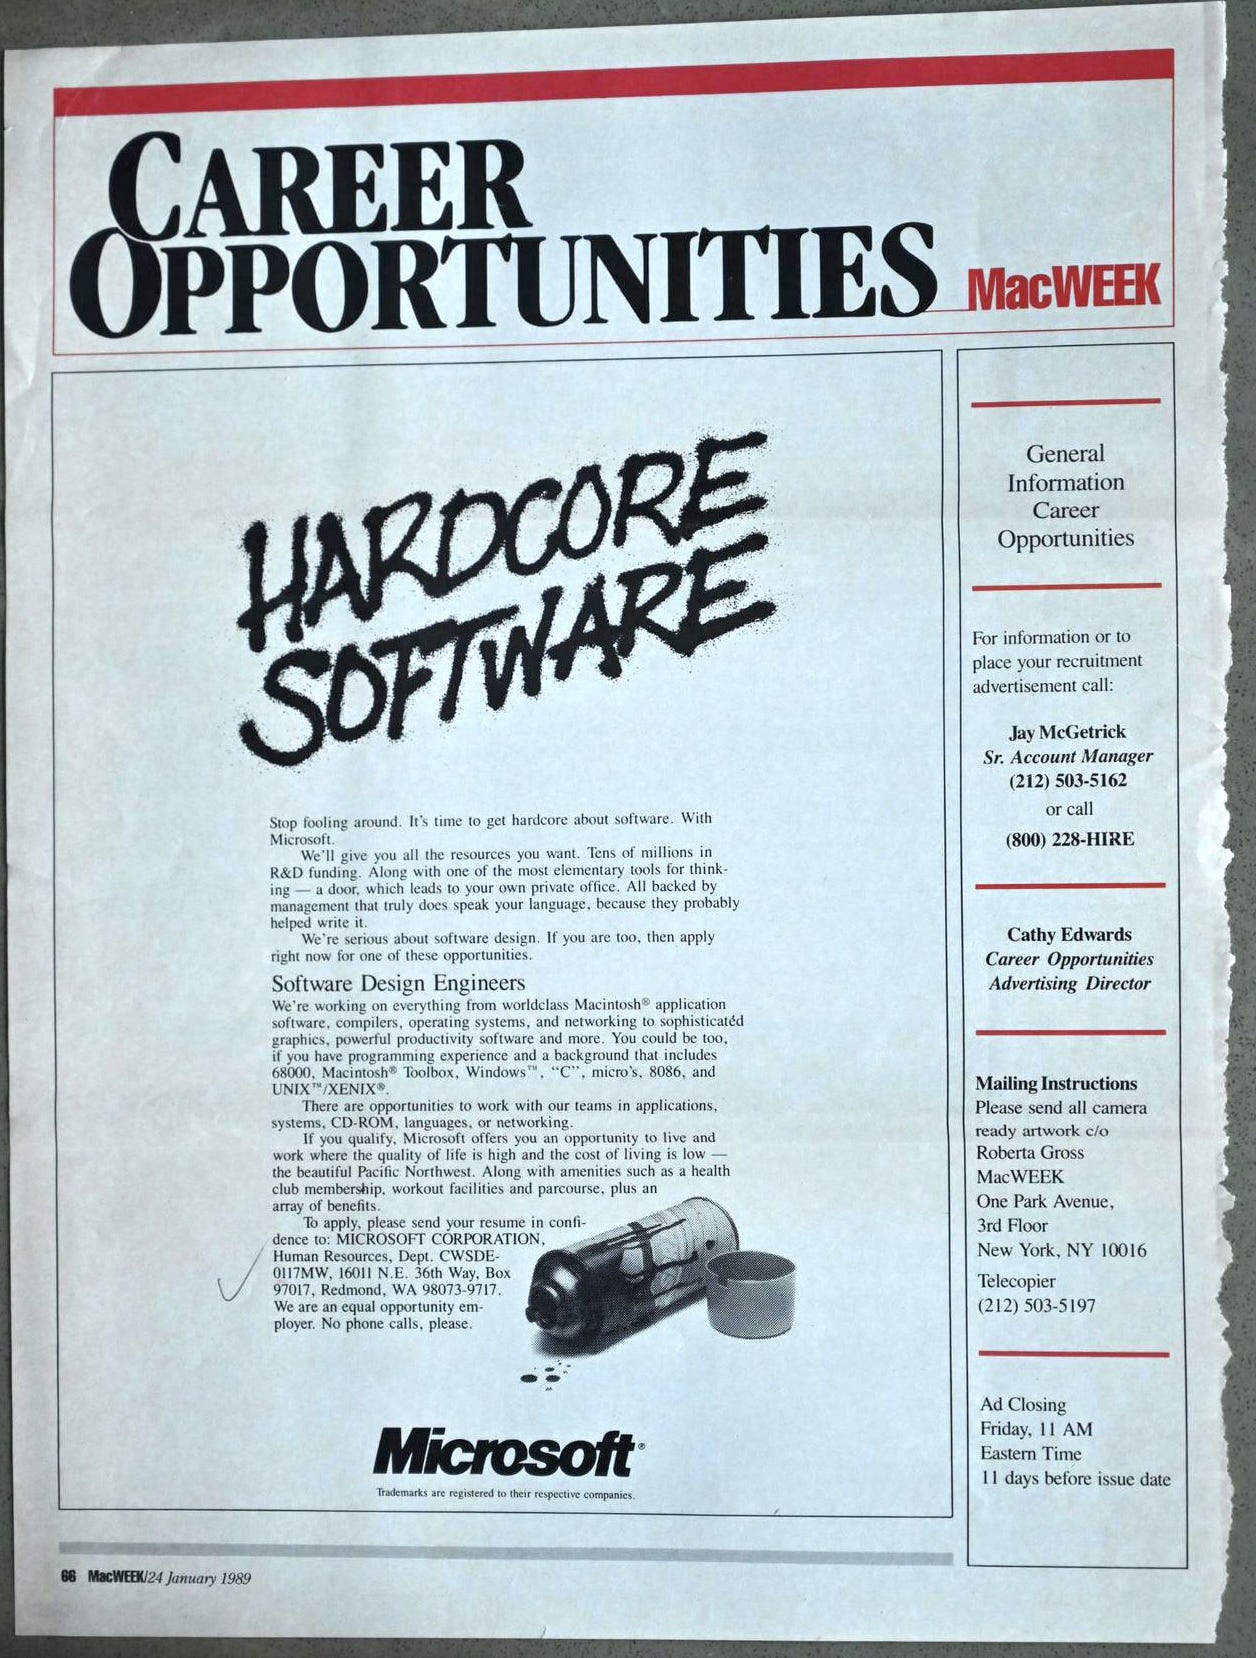 Page from MacWorld Magazine with an add for Hardcore Software at Microsoft "Career Opportunities"